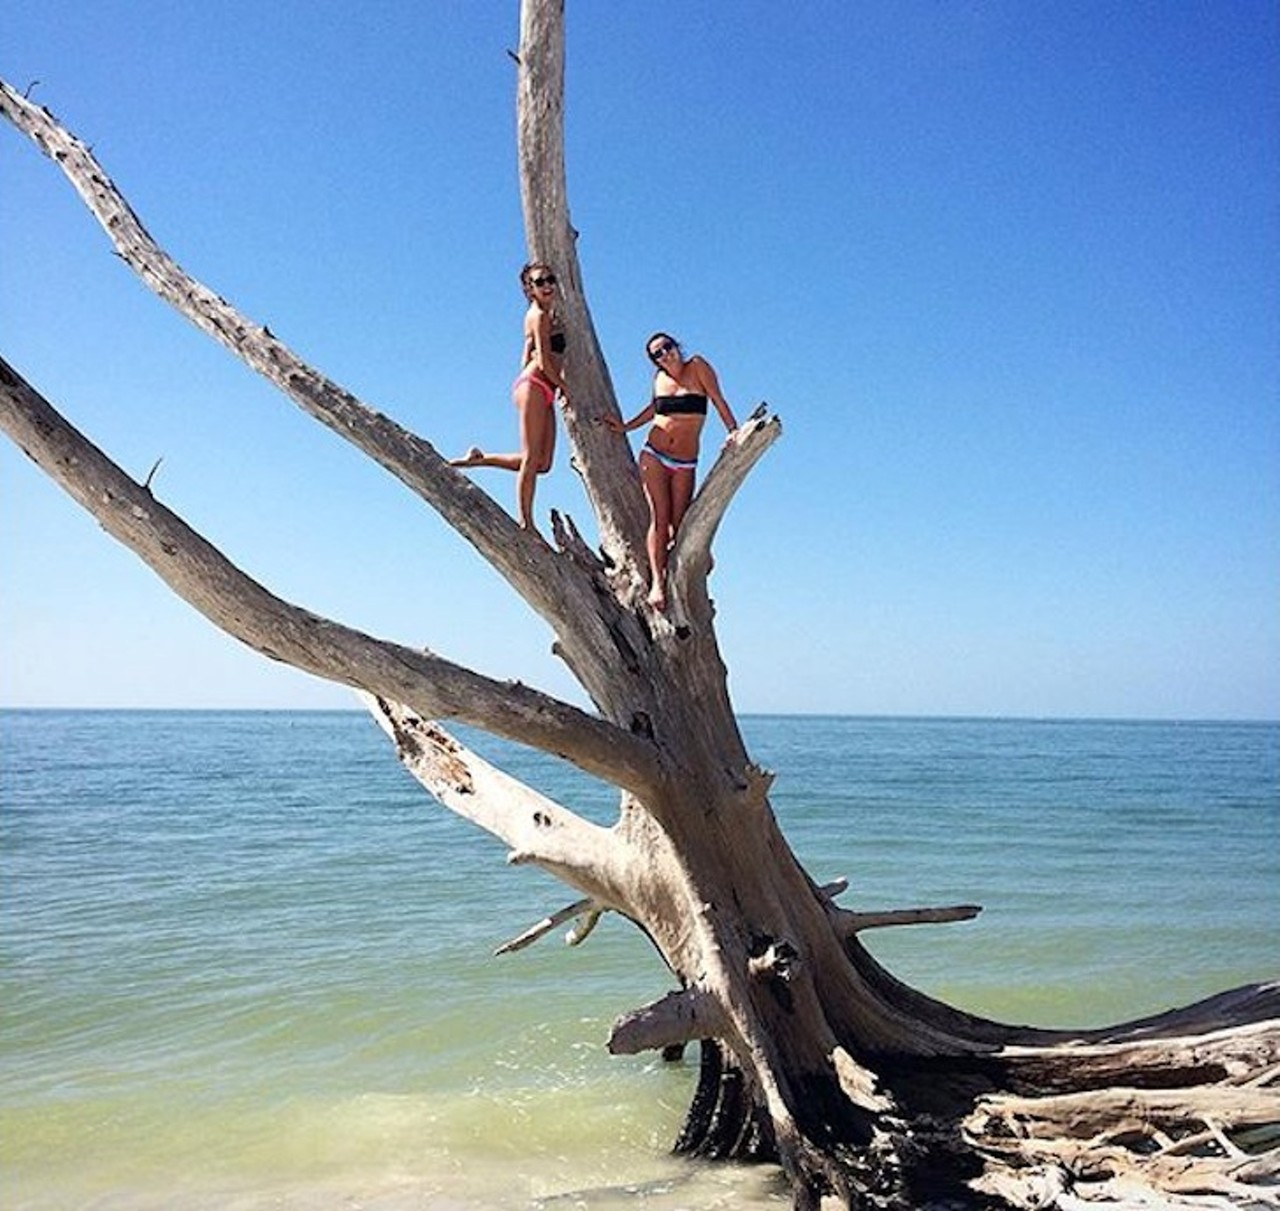 LOVERS KEY
Lovers Key came to prominence as a place where couples would seclude themselves for romantic rendezvous. No one&#146;s saying you can&#146;t get steamy on the sand dunes, but now there&#146;s plenty more to do: kayaking, fishing, hiking and bald eagle watching.
Distance: 3 hours and 32 minutes
Photo via staysonyamind/Instagram